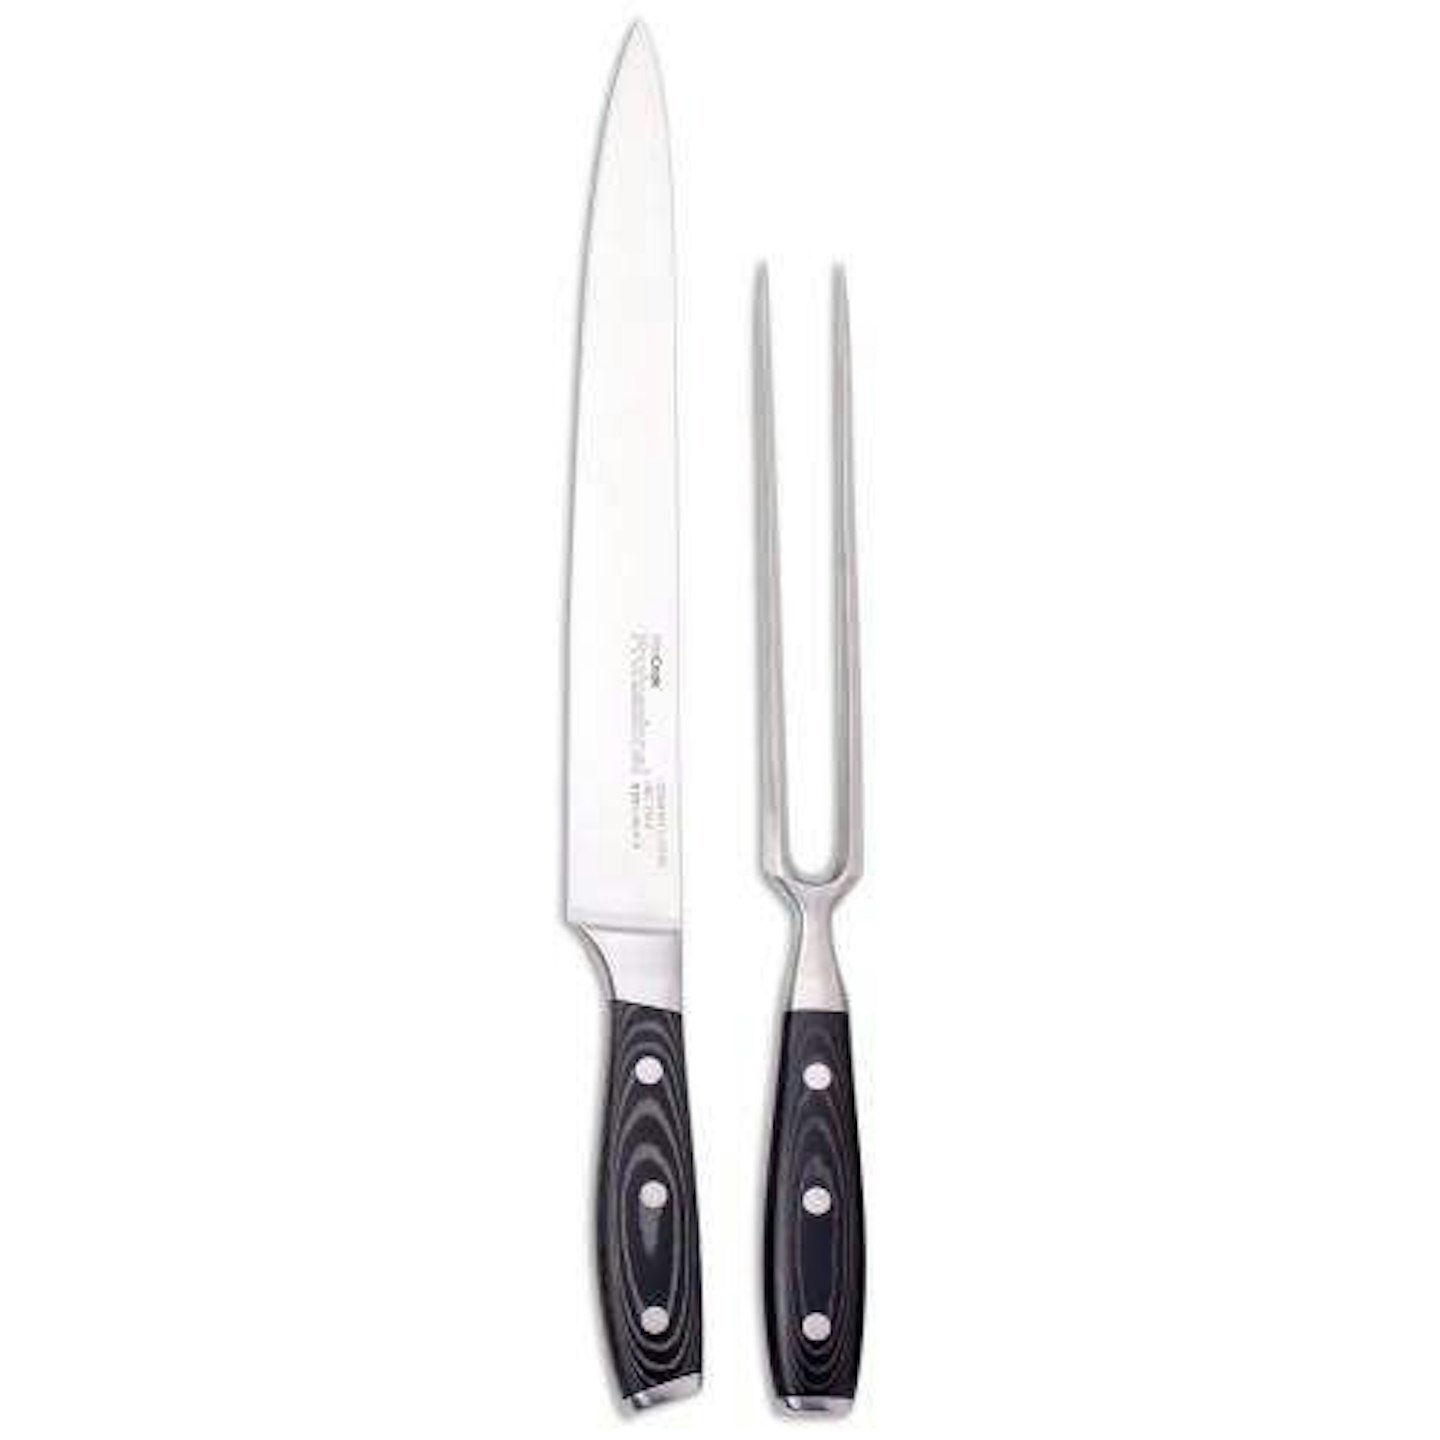 Carving Knife and Fork: Professional X50 Carving Set